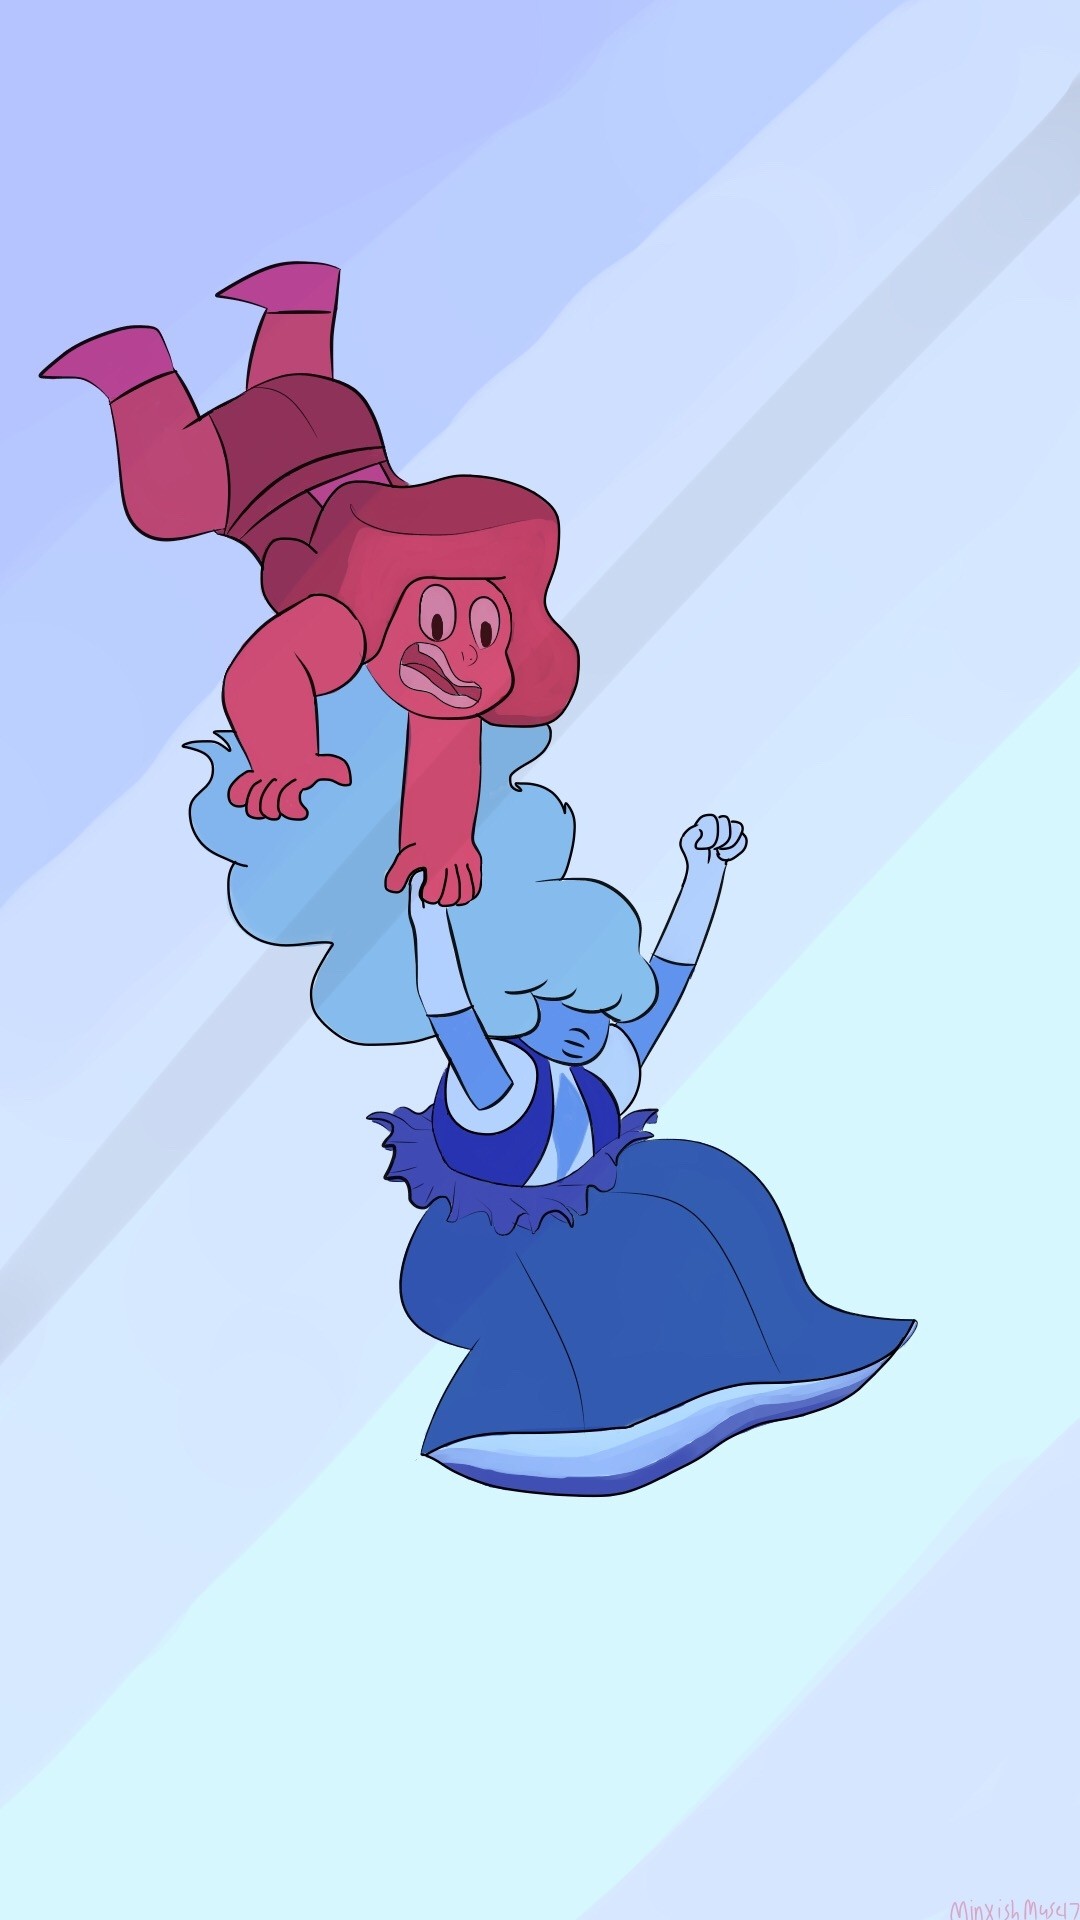 Steven Universe wallpaper for android